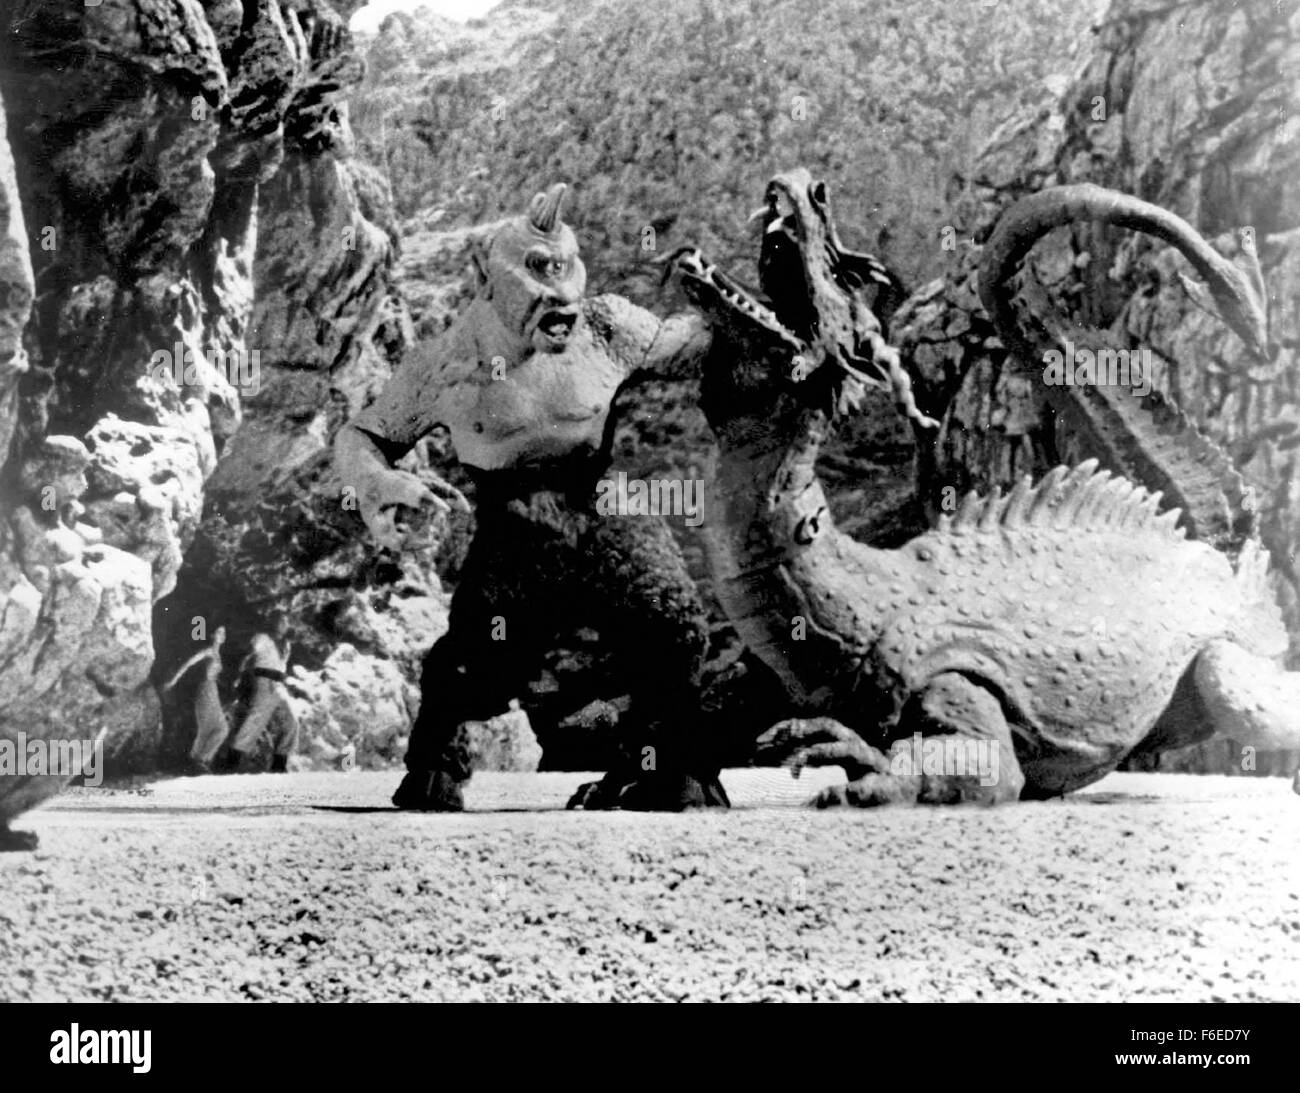 Dec 23, 1958; Hollywood, CA, USA; A scene wher the Cyclops battles the dragon in the Columbia Pictures fantasy adventure, 'The 7th Voyage of Sinbad.' Directed by Nathan Juran. Stock Photo